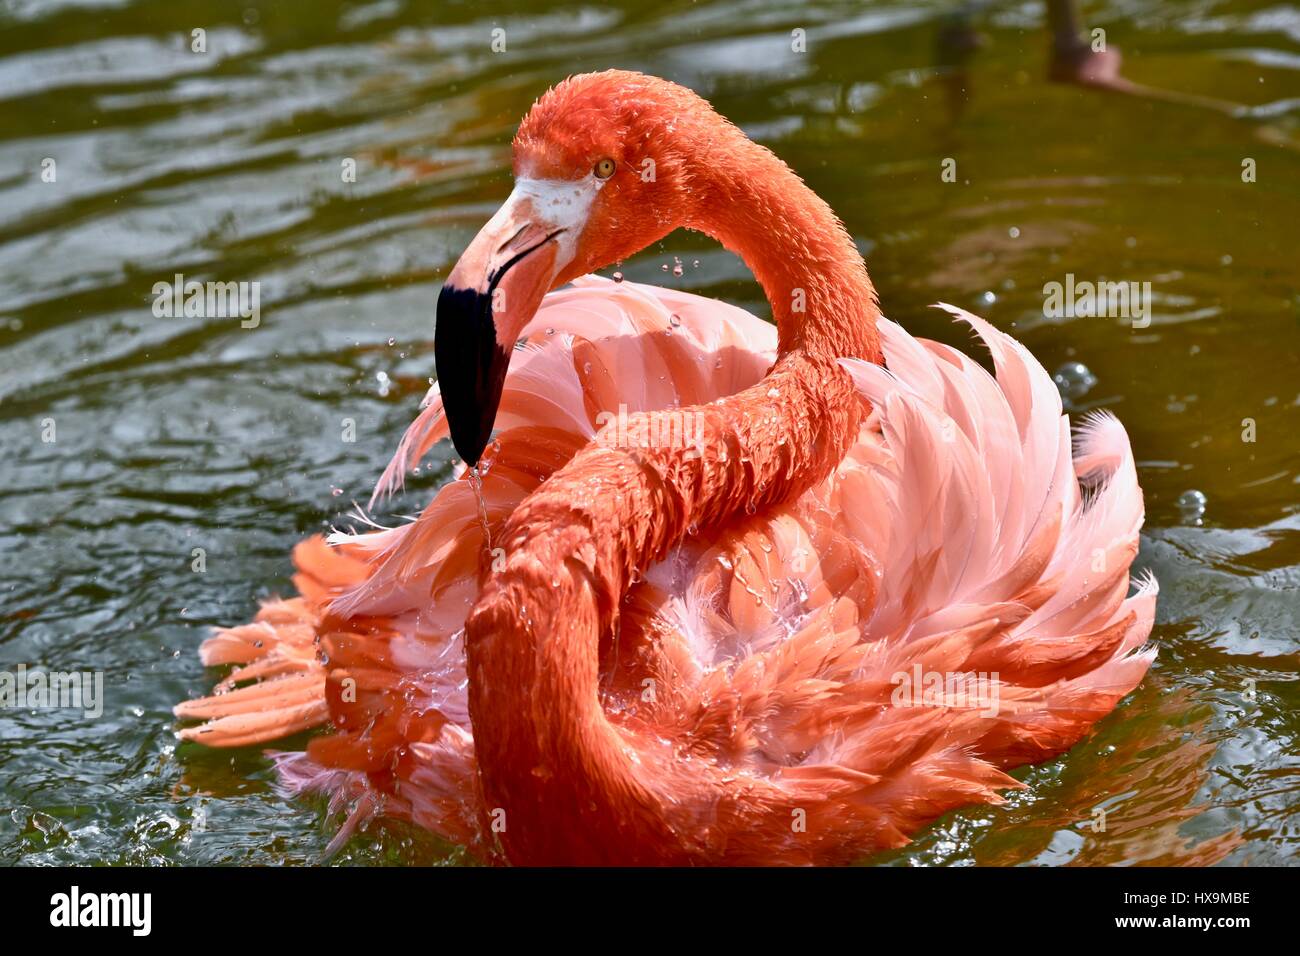 A Caribbean Flamingo (Pheonicopterus ruber ruber) splashing in the water on a warm spring day Stock Photo